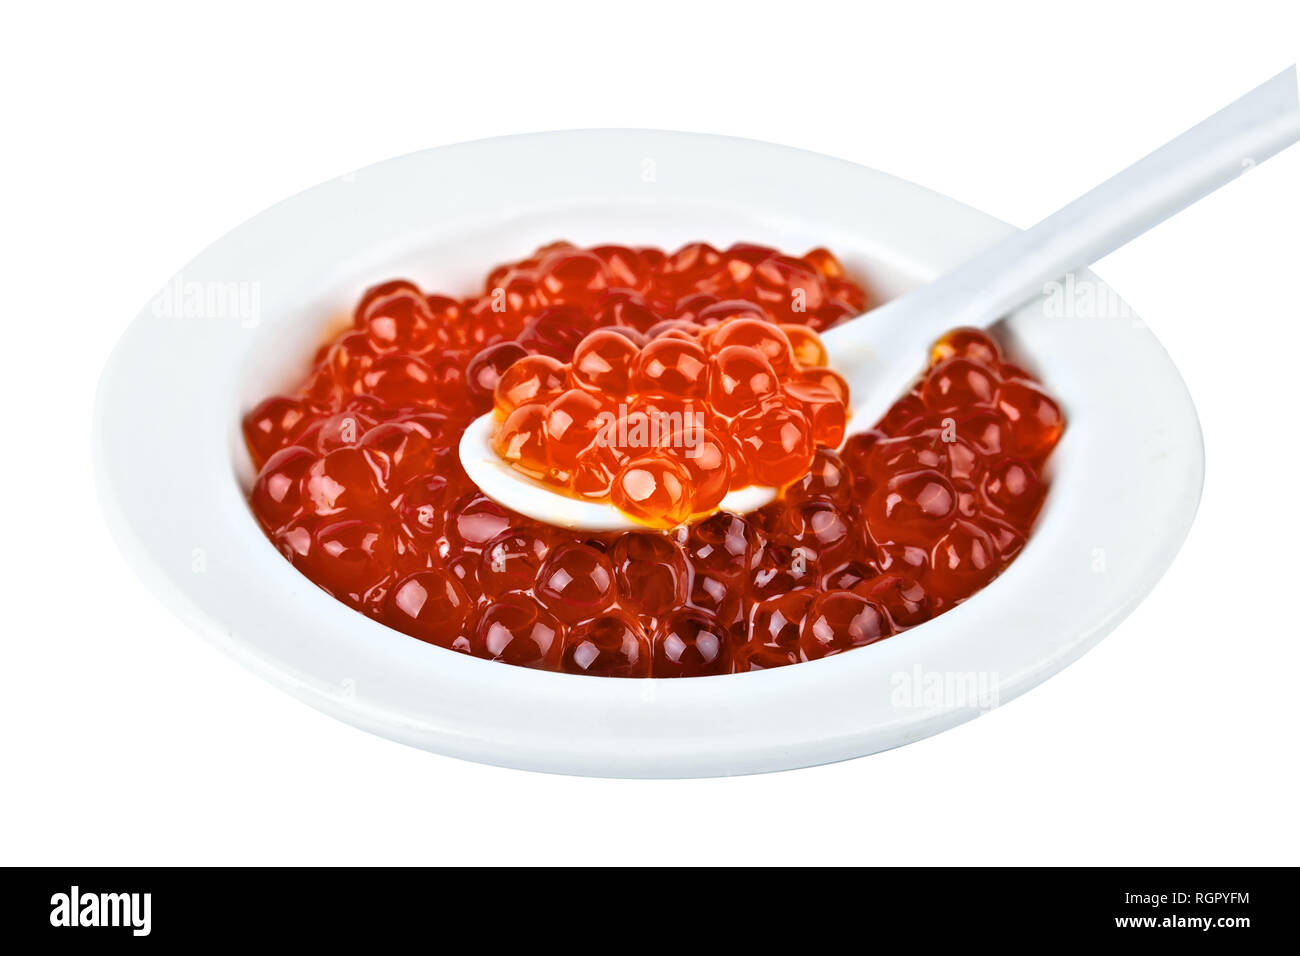 Red caviar in a glass container. Isolated object on white background. Stock Photo